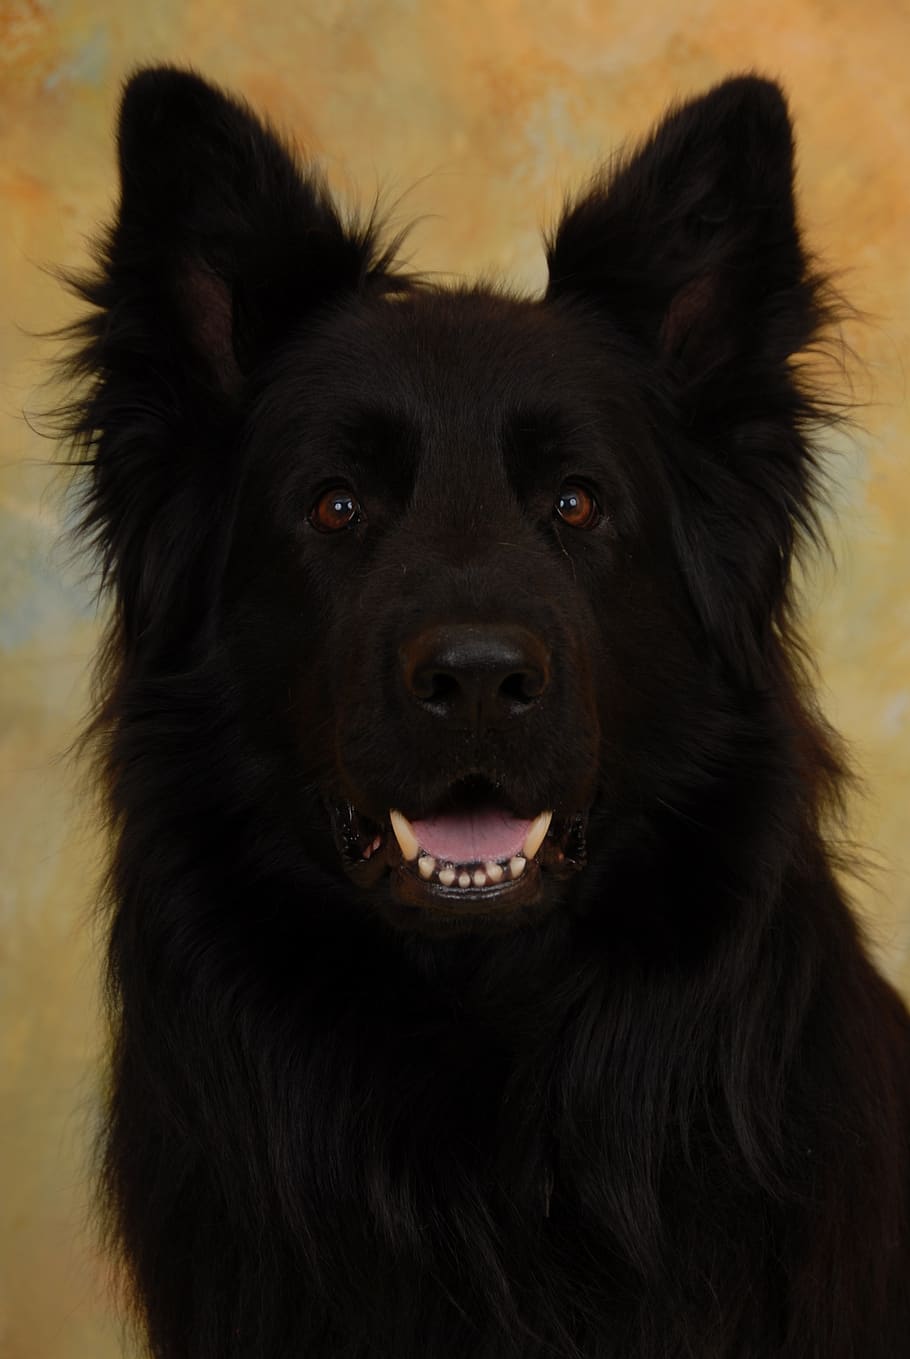 lacquer black long hair german shepherd, black, german longhaired pointer, canine, one animal, dog, animal, pets, animal themes, domestic animals